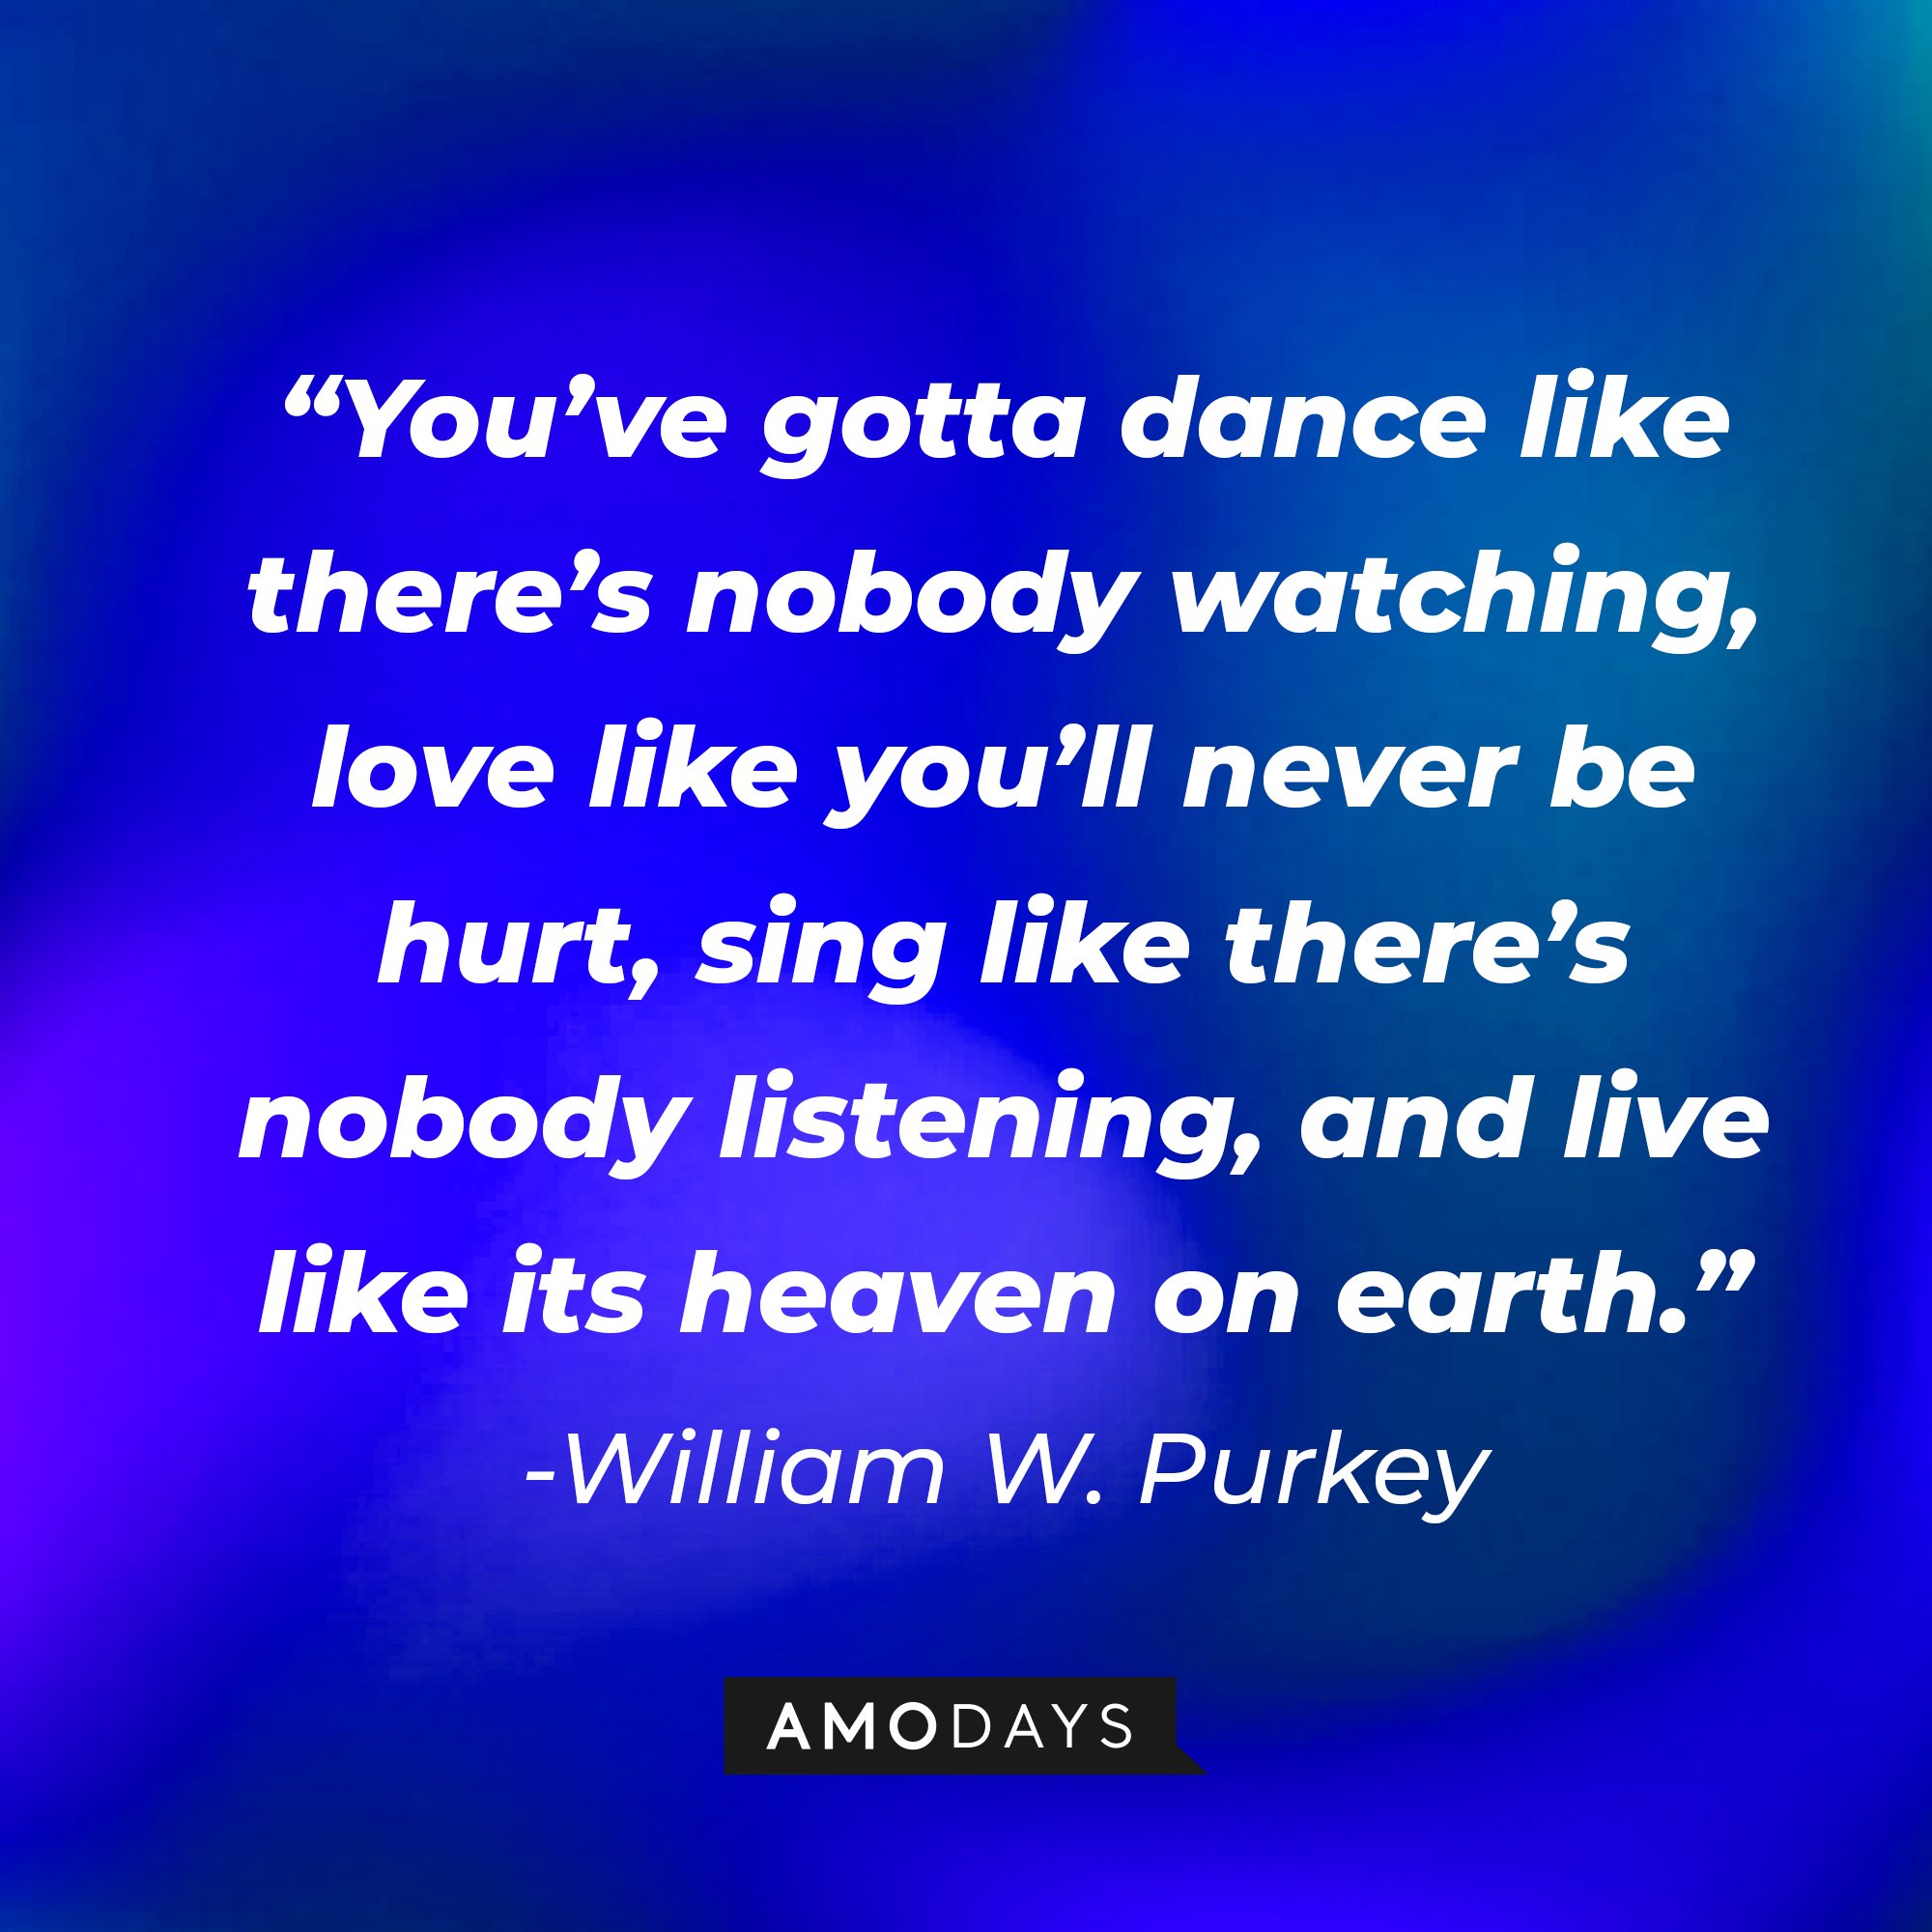 William W. Purkey’s quote: “You’ve gotta dance like there’s nobody watching, love like you'll never be hurt, sing like there's nobody listening, and live like its heaven on earth.” | Image: AmoDays